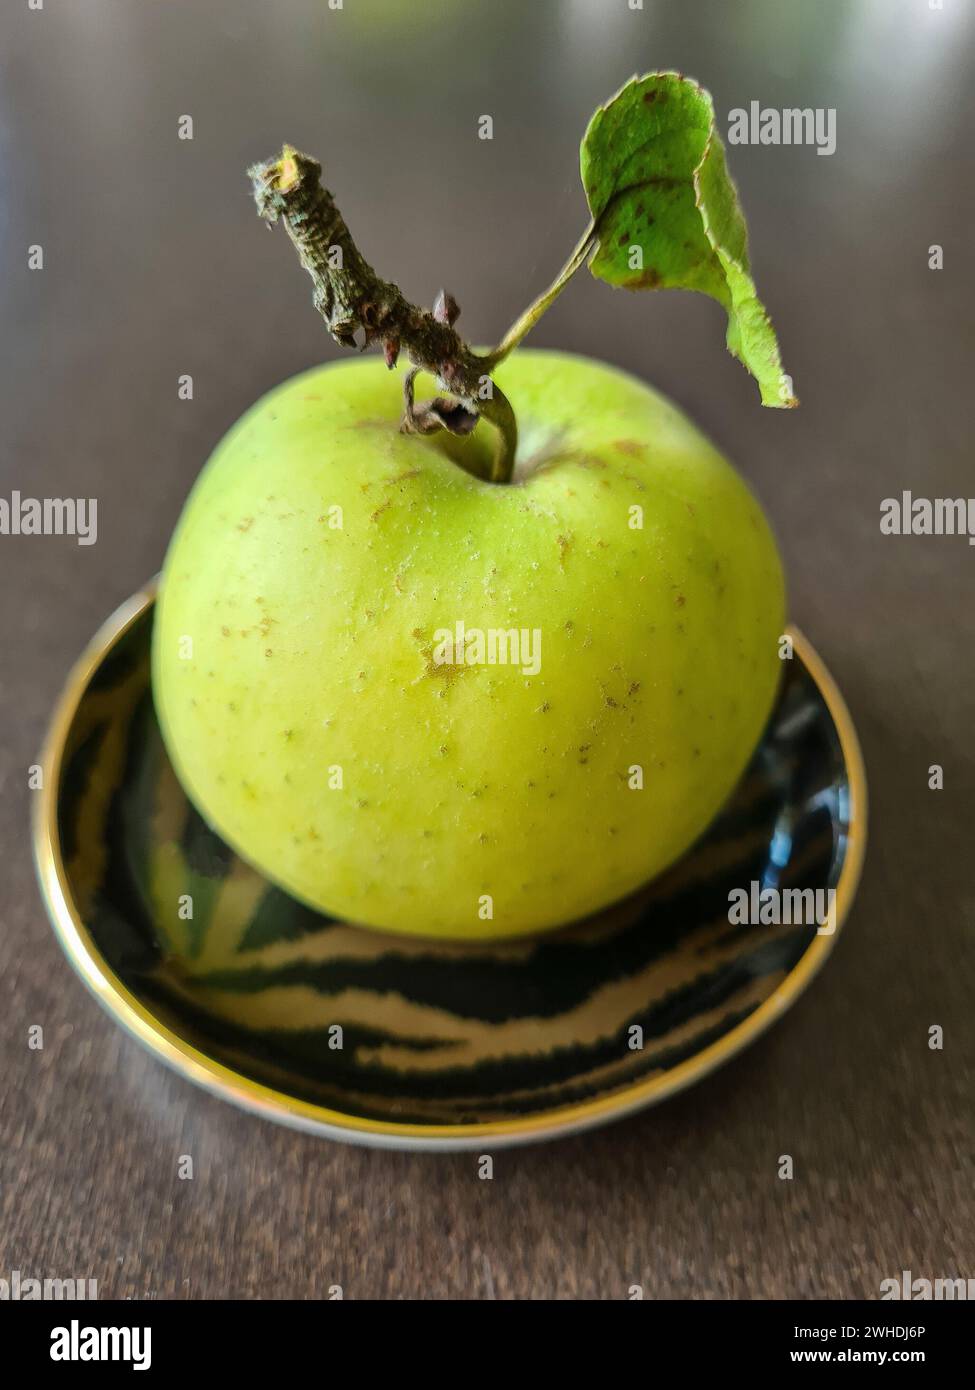 A whole green round apple with stem and leaf Stock Photo